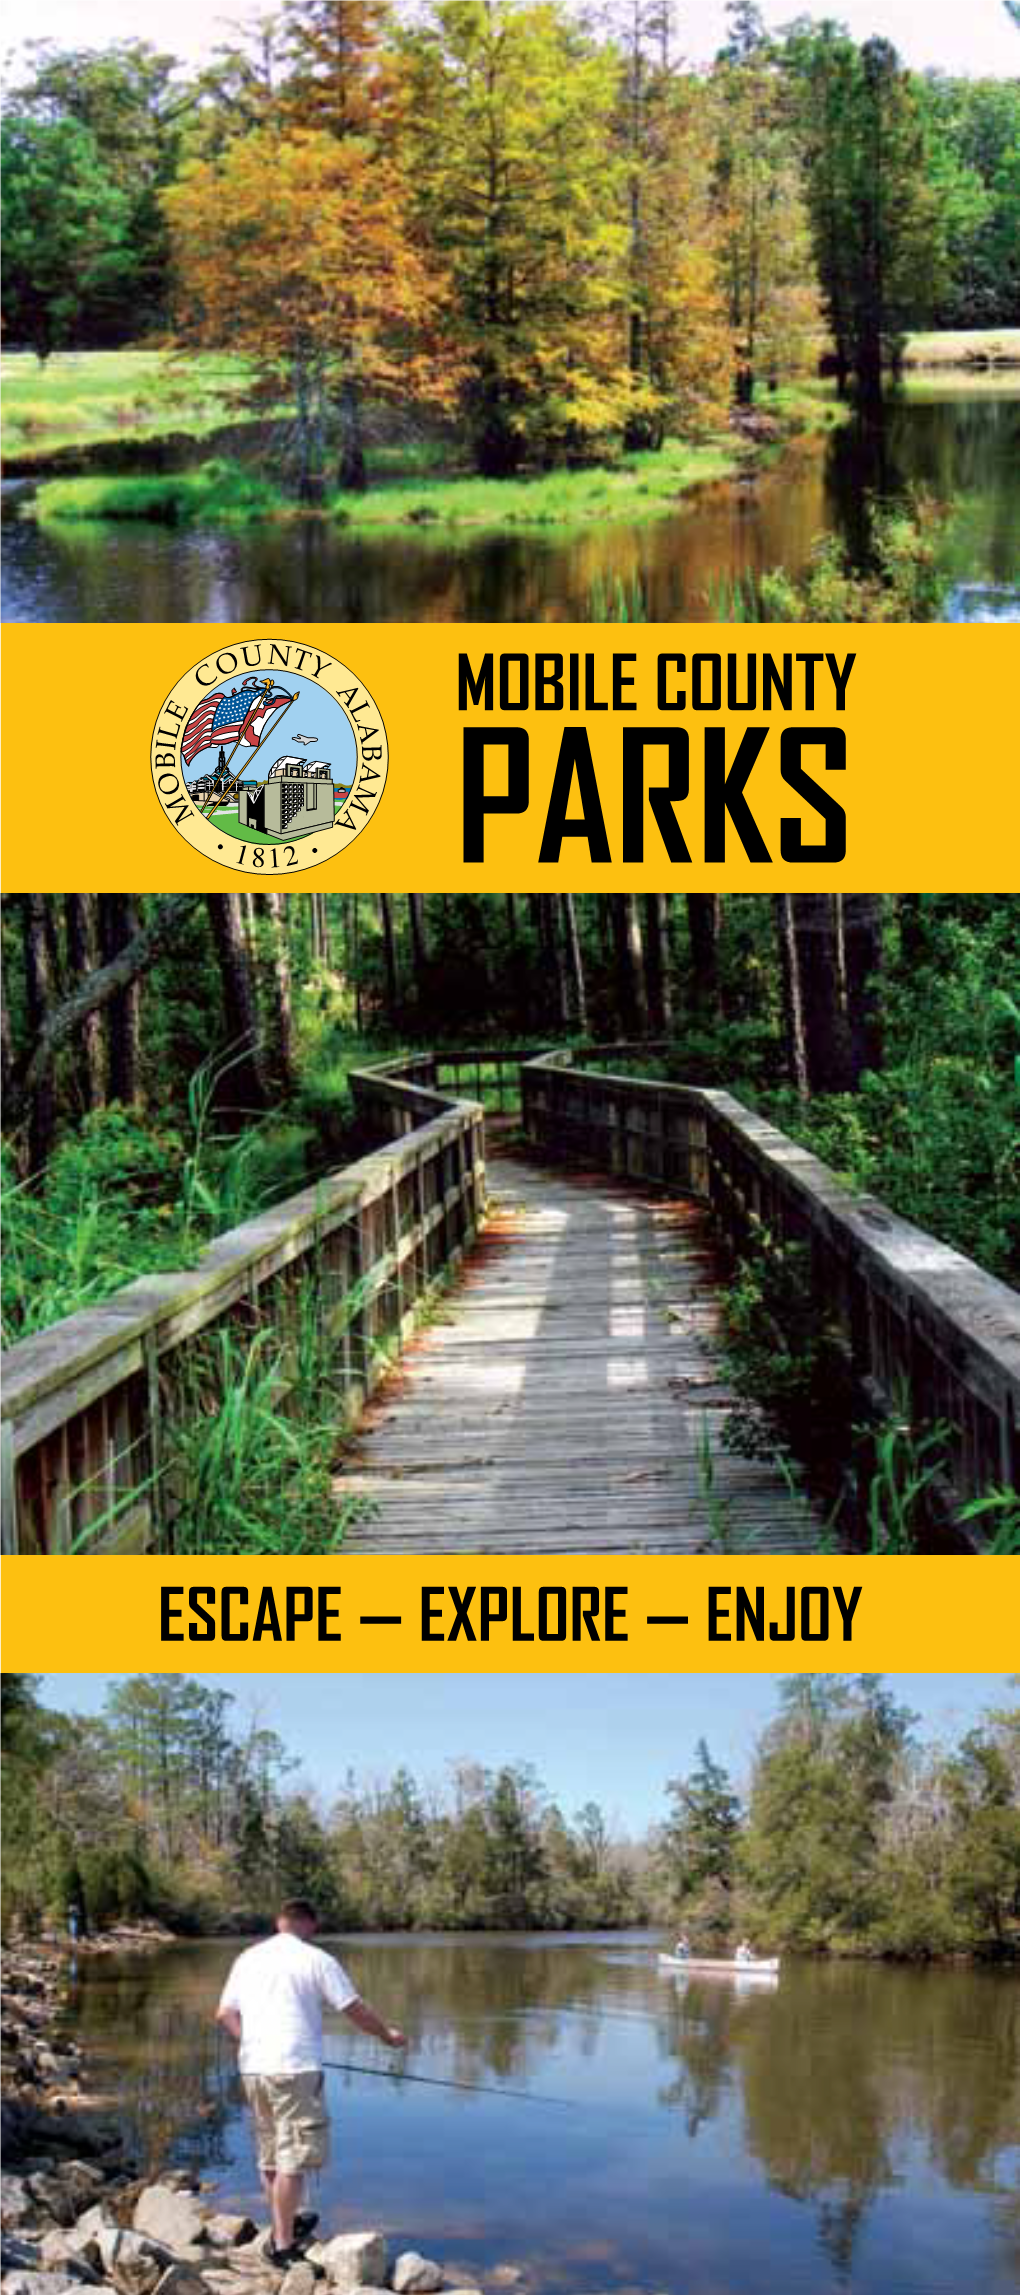 Mobile County PARKS